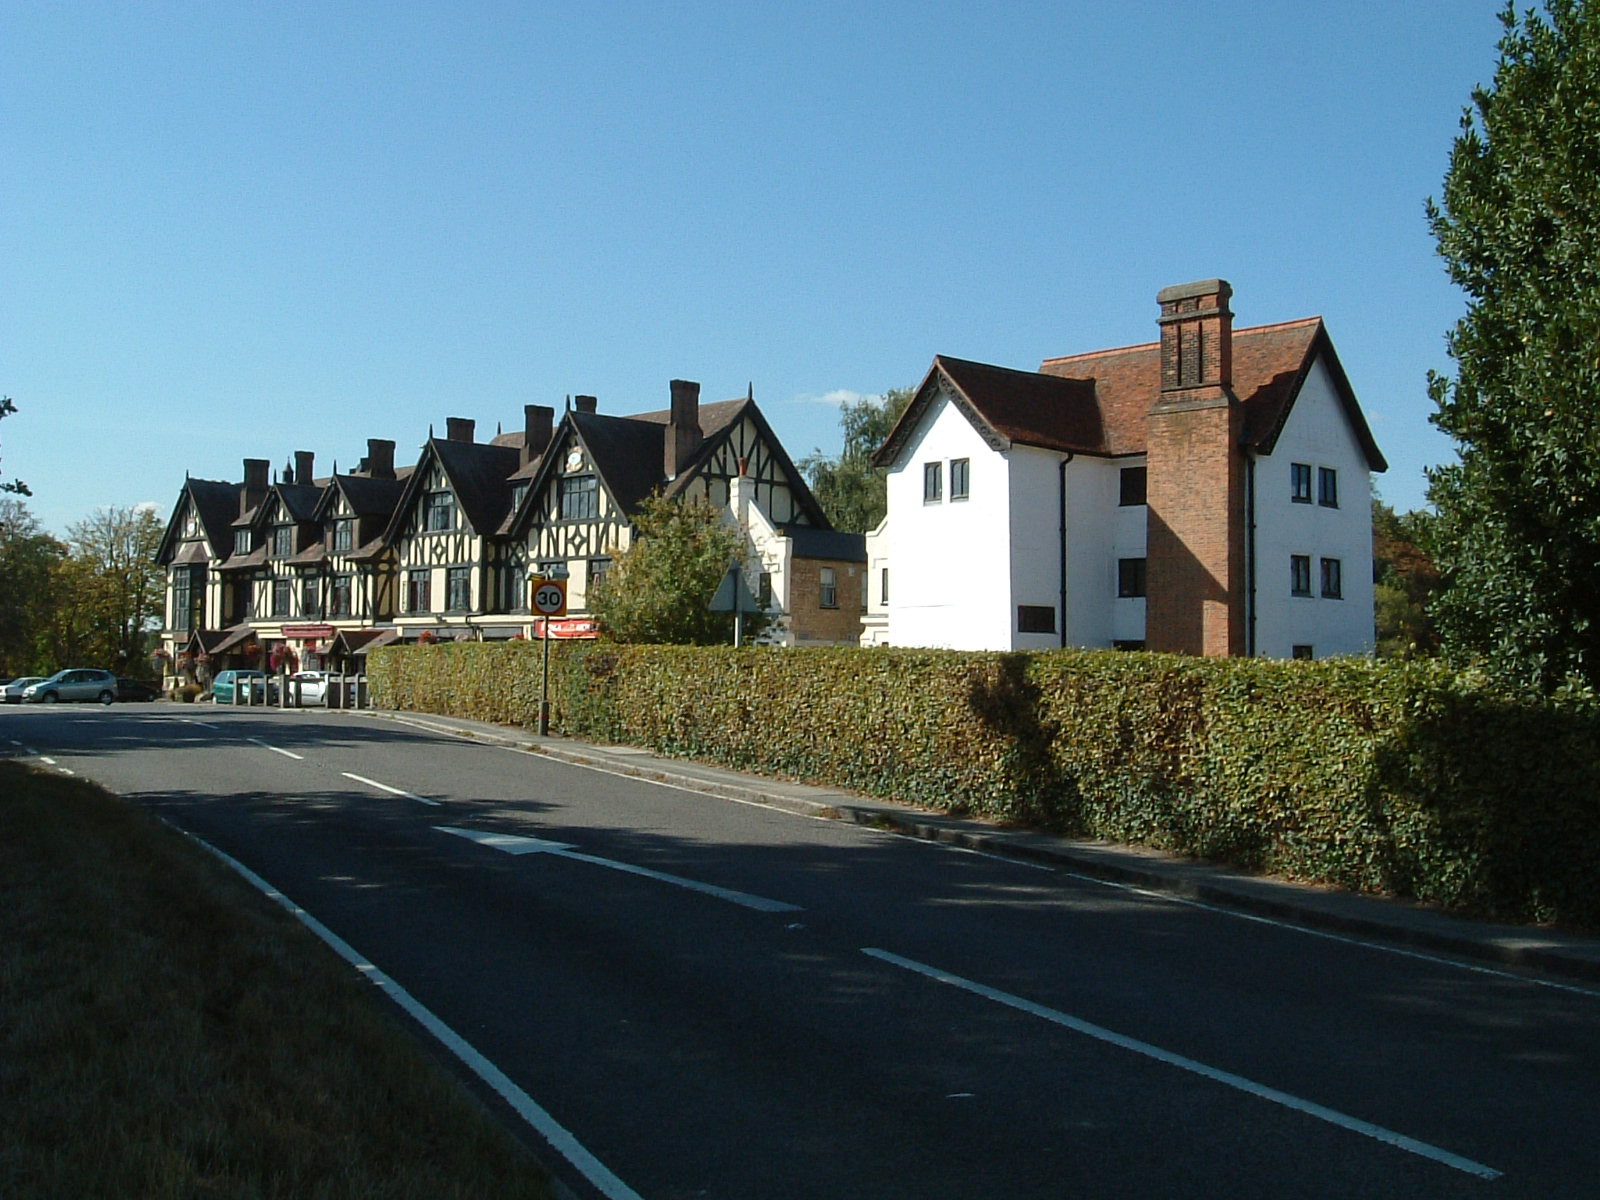 The Royal Forest Hotel (left) and Queen Elizabeth's Hunting Lodge (right)